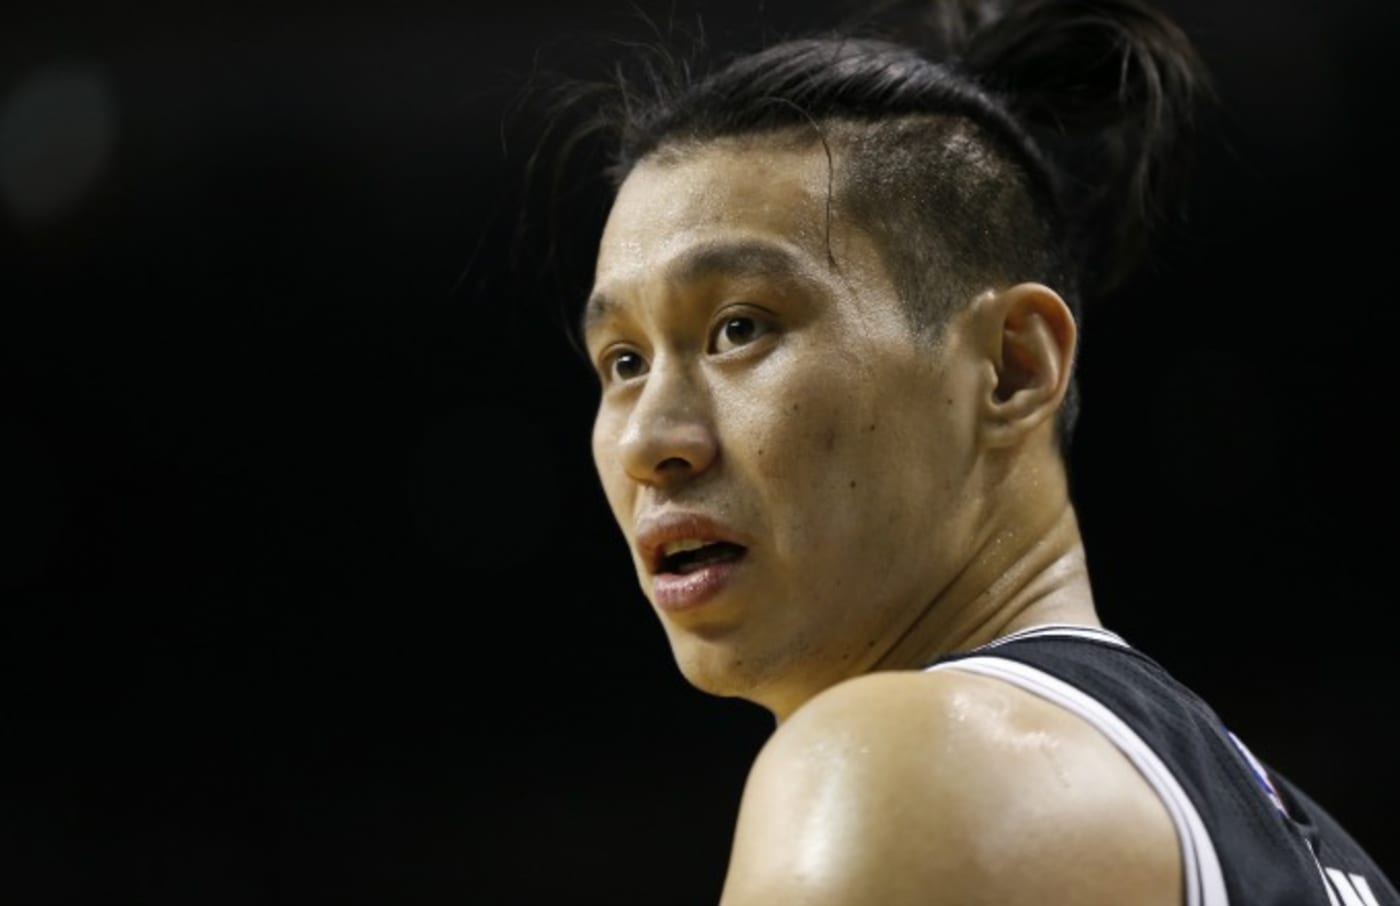 Jeremy Lin reacts to a call during a Nets game.